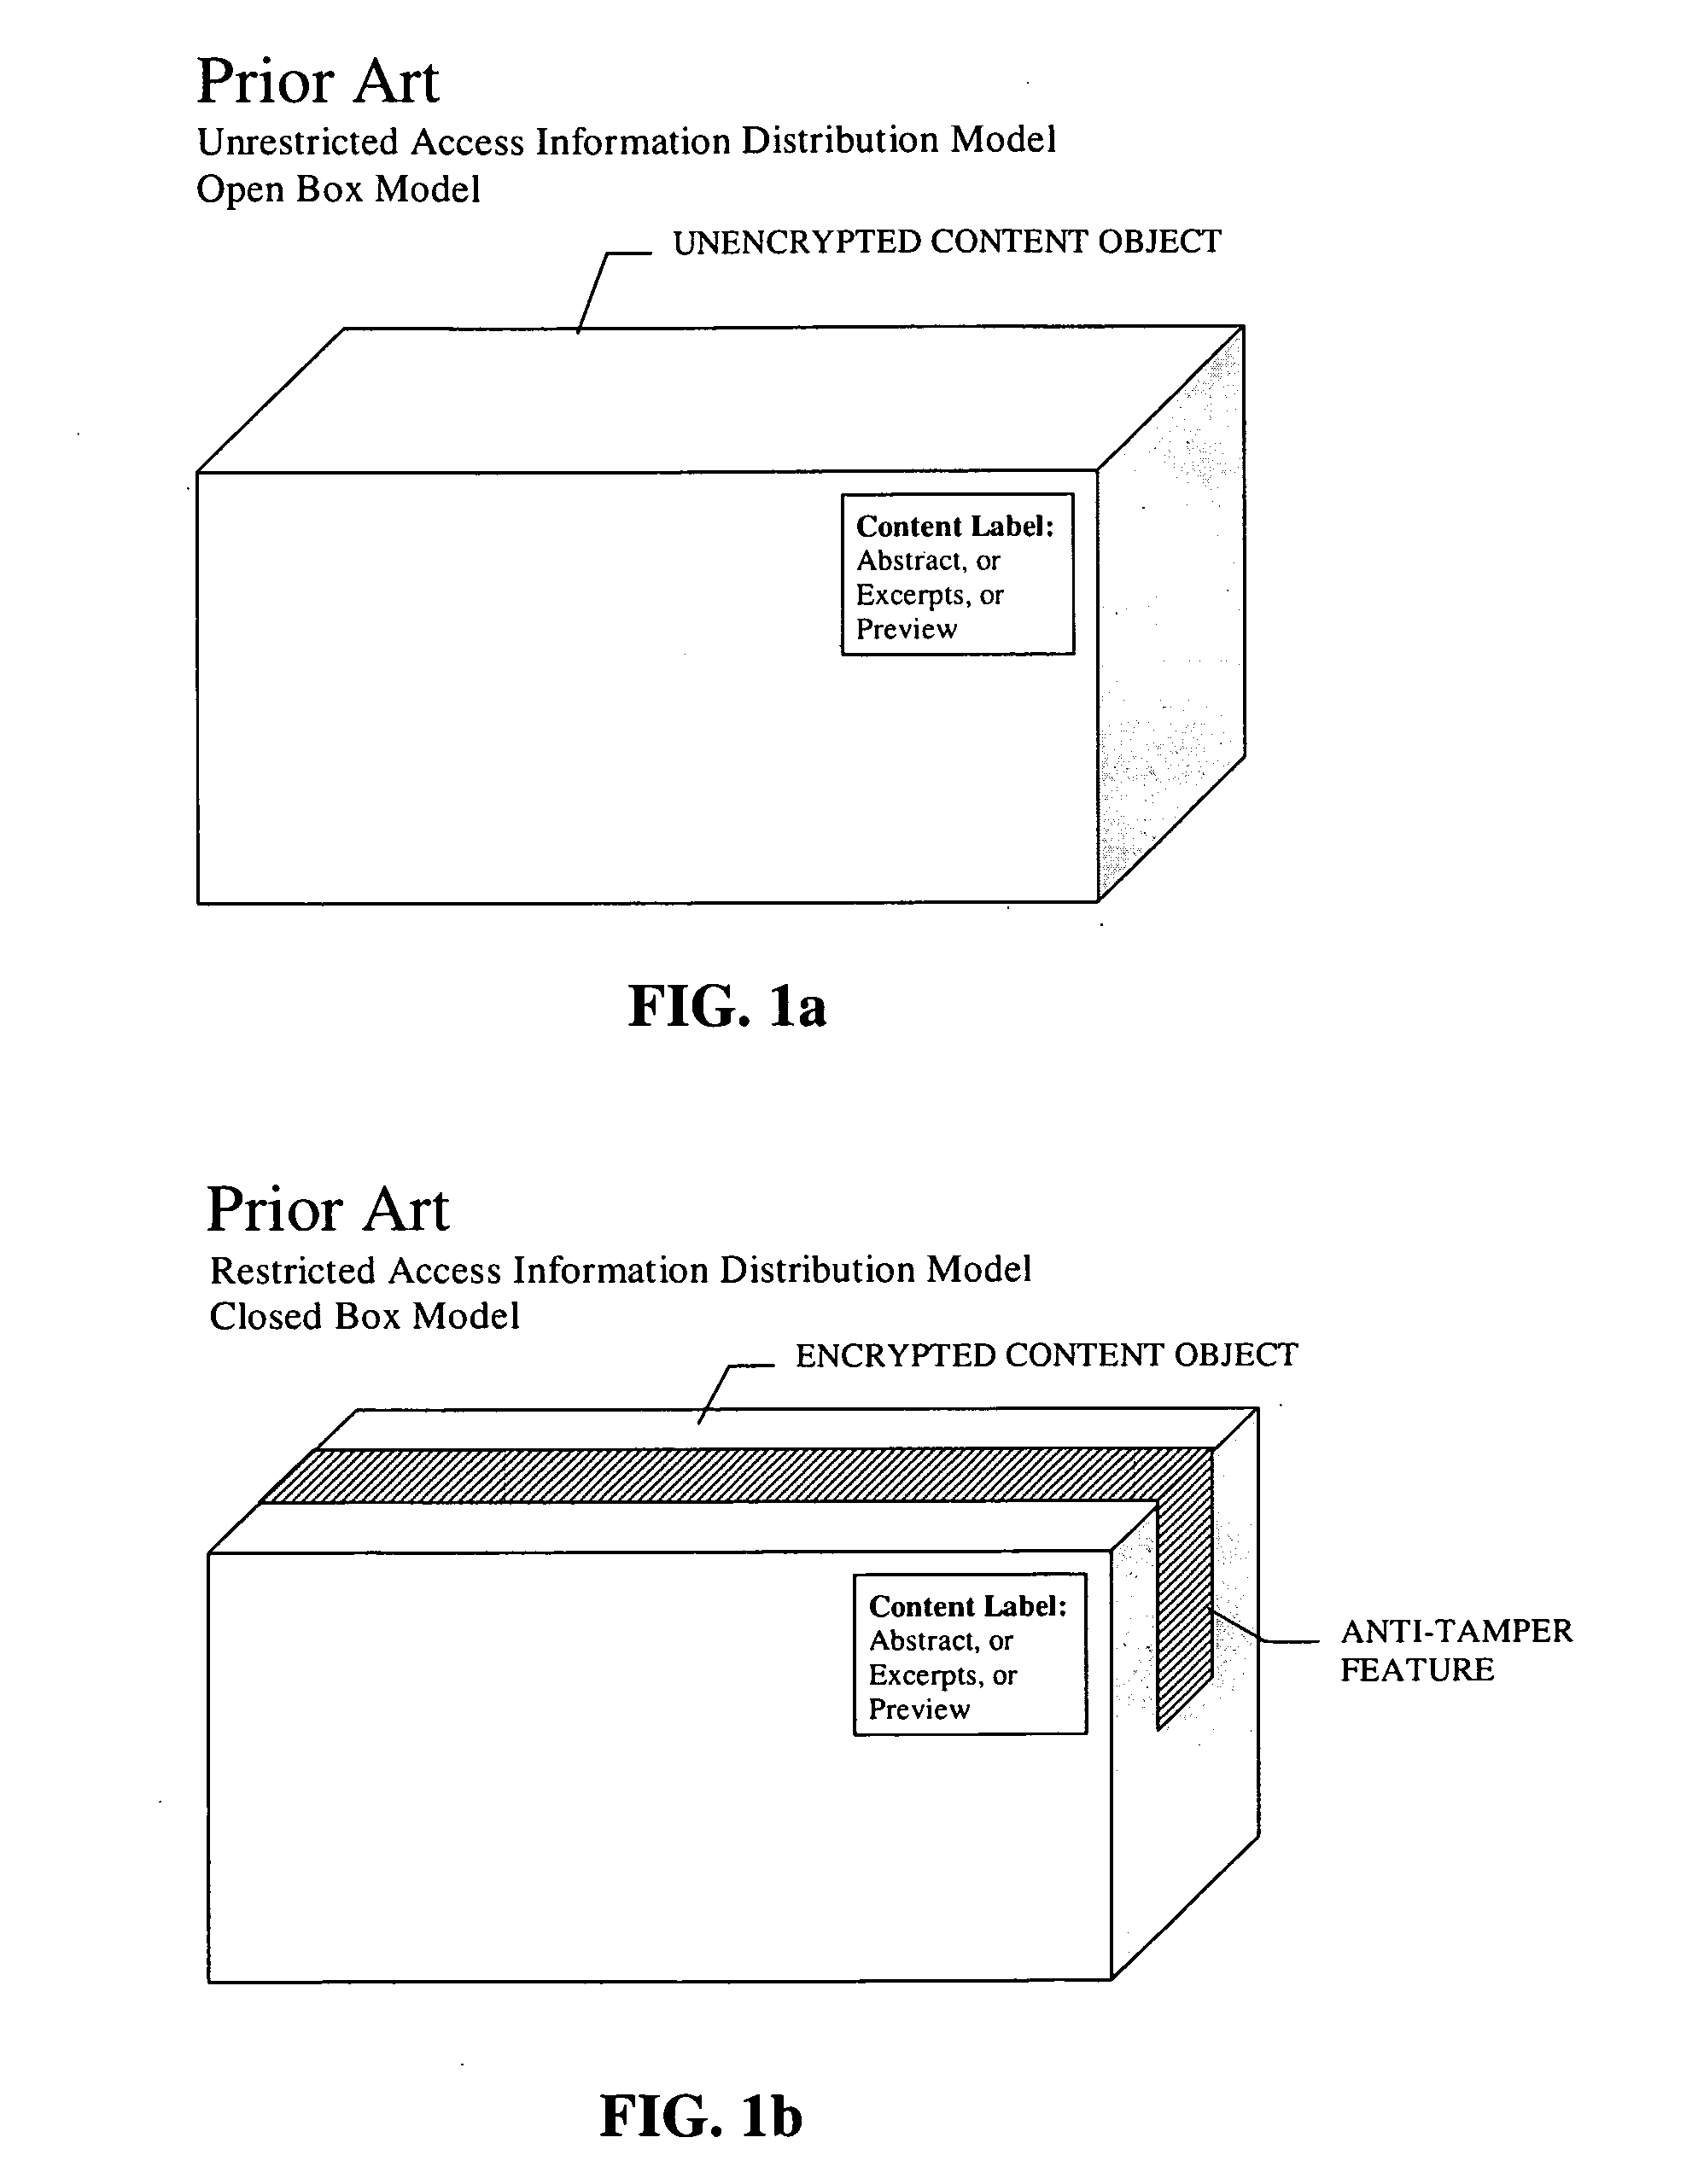 Method and system for facilitating search, selection, preview, purchase evaluation, offering for sale, distribution, and/or sale of digital content and enhancing the security thereof